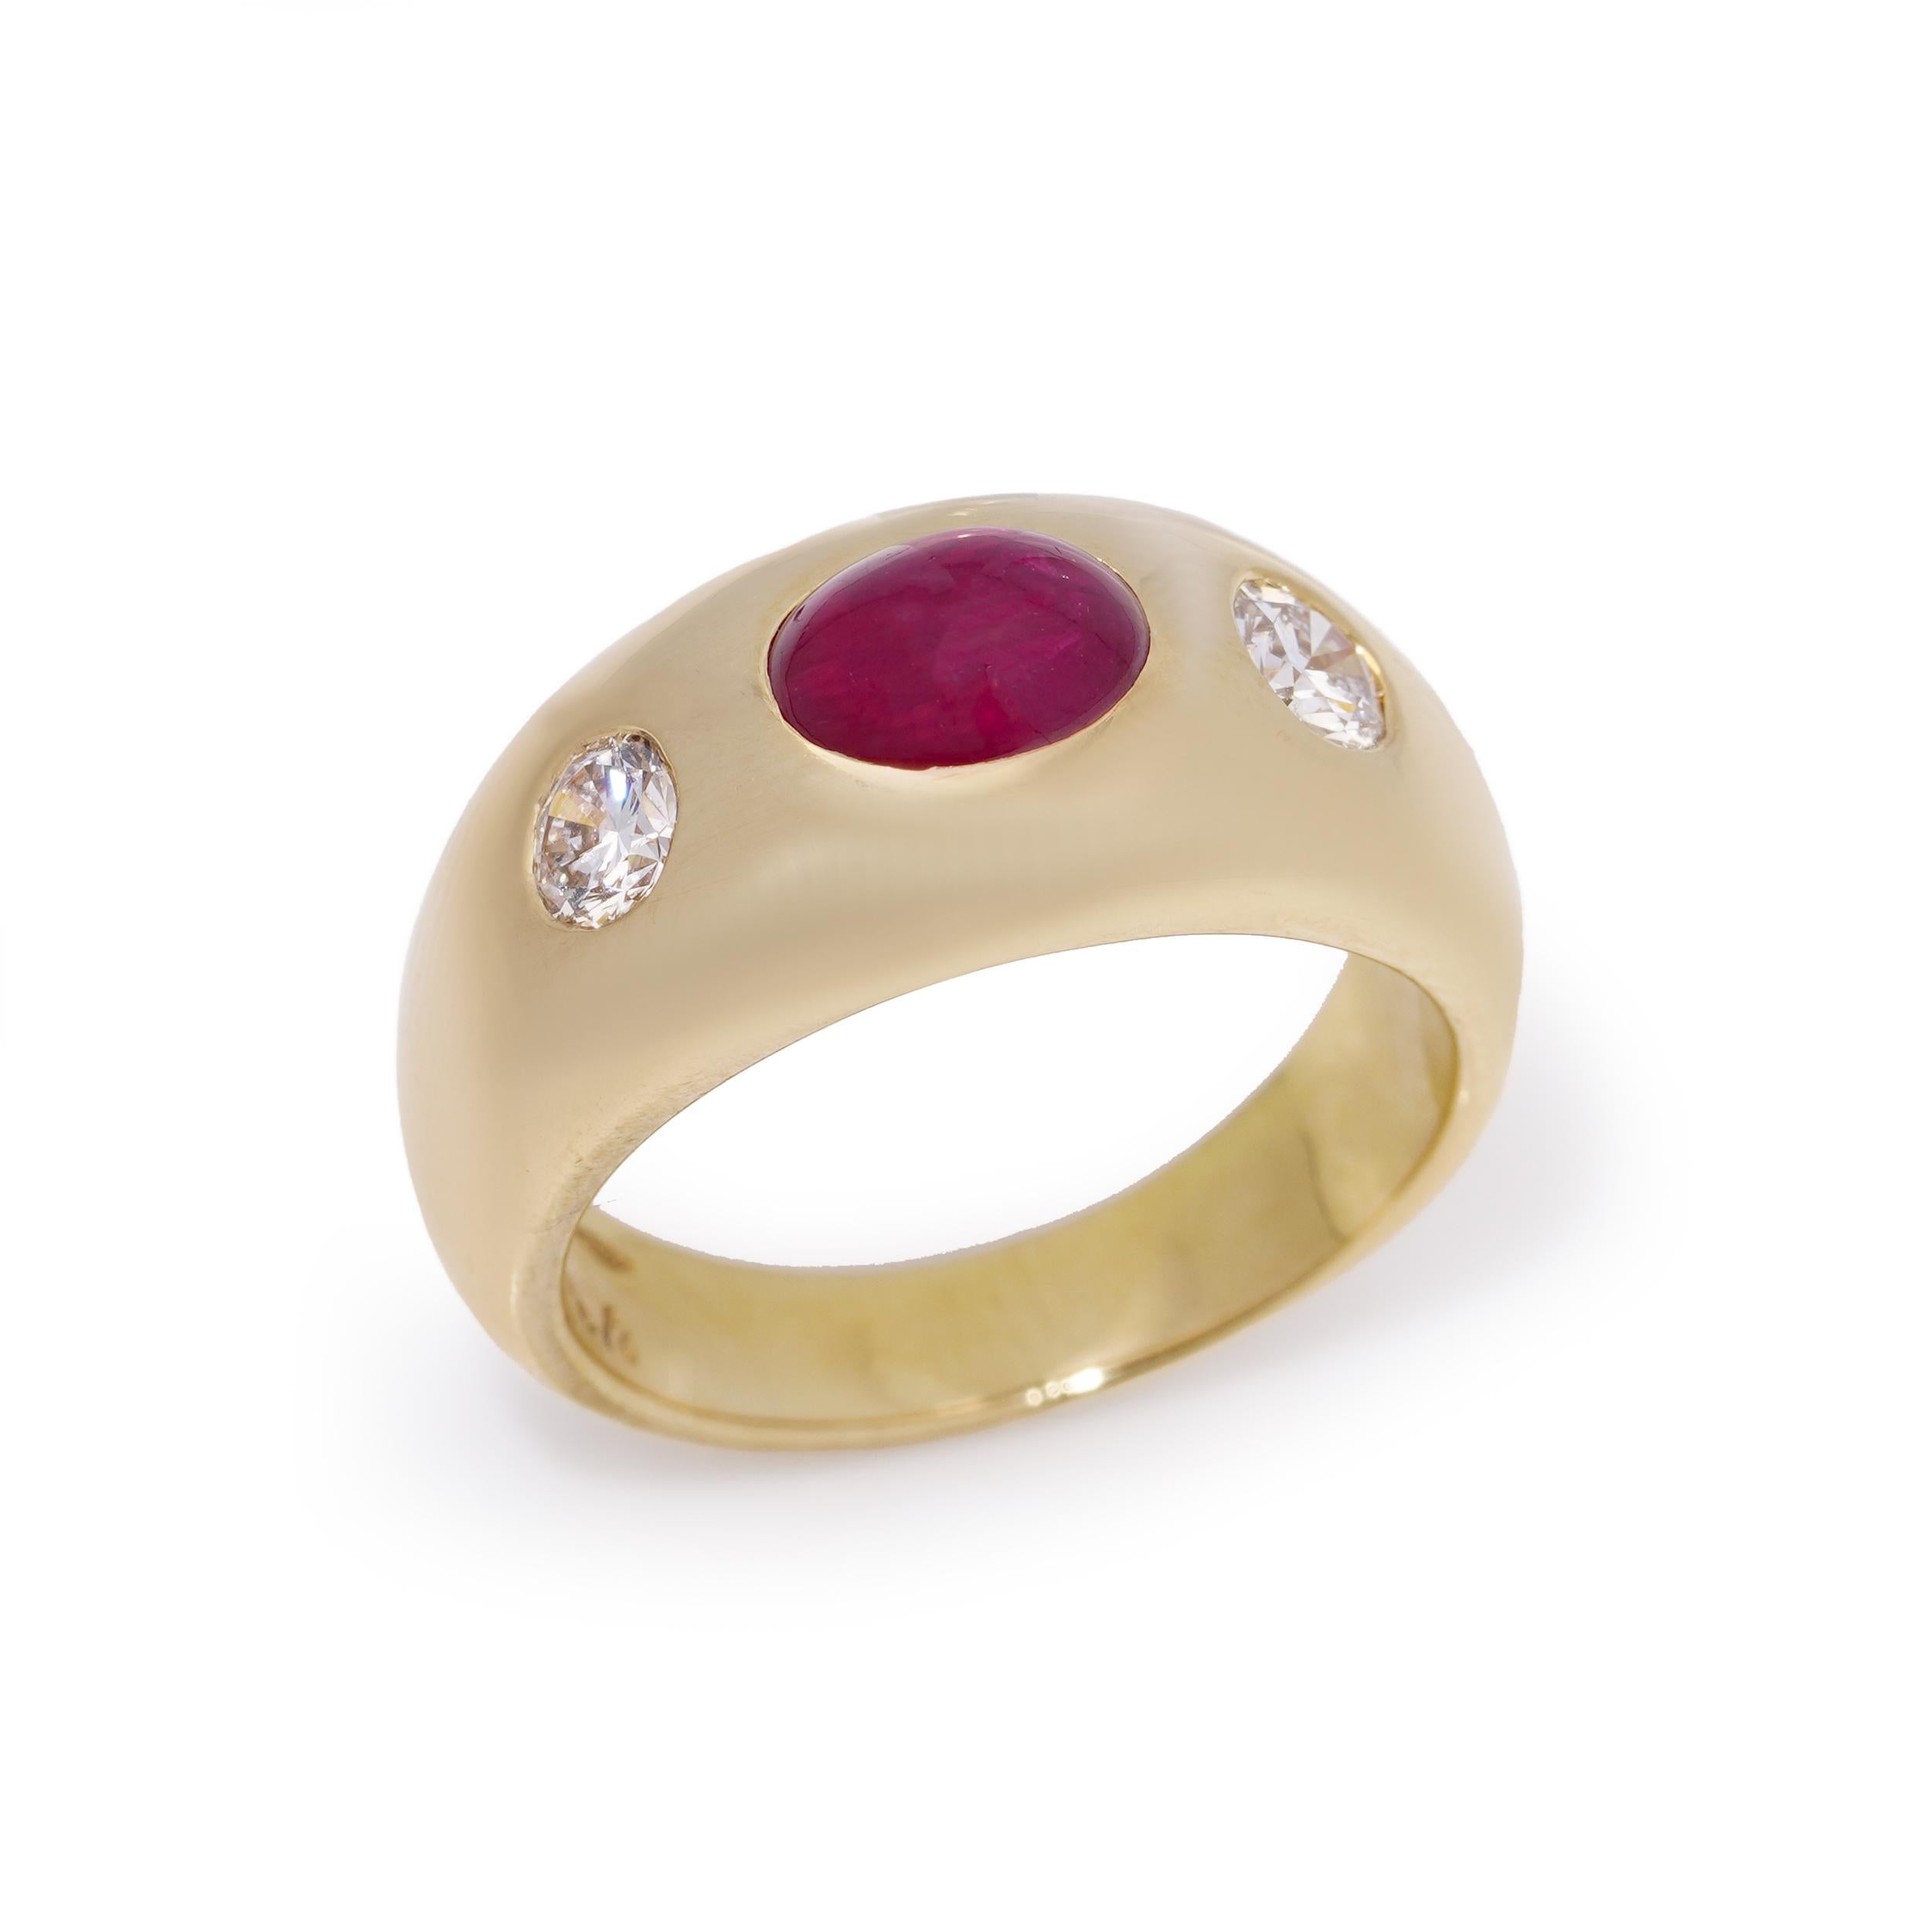 Bvlgari 18kt. gold three - stone Burma Cabochon ruby and diamond ring For Sale 2